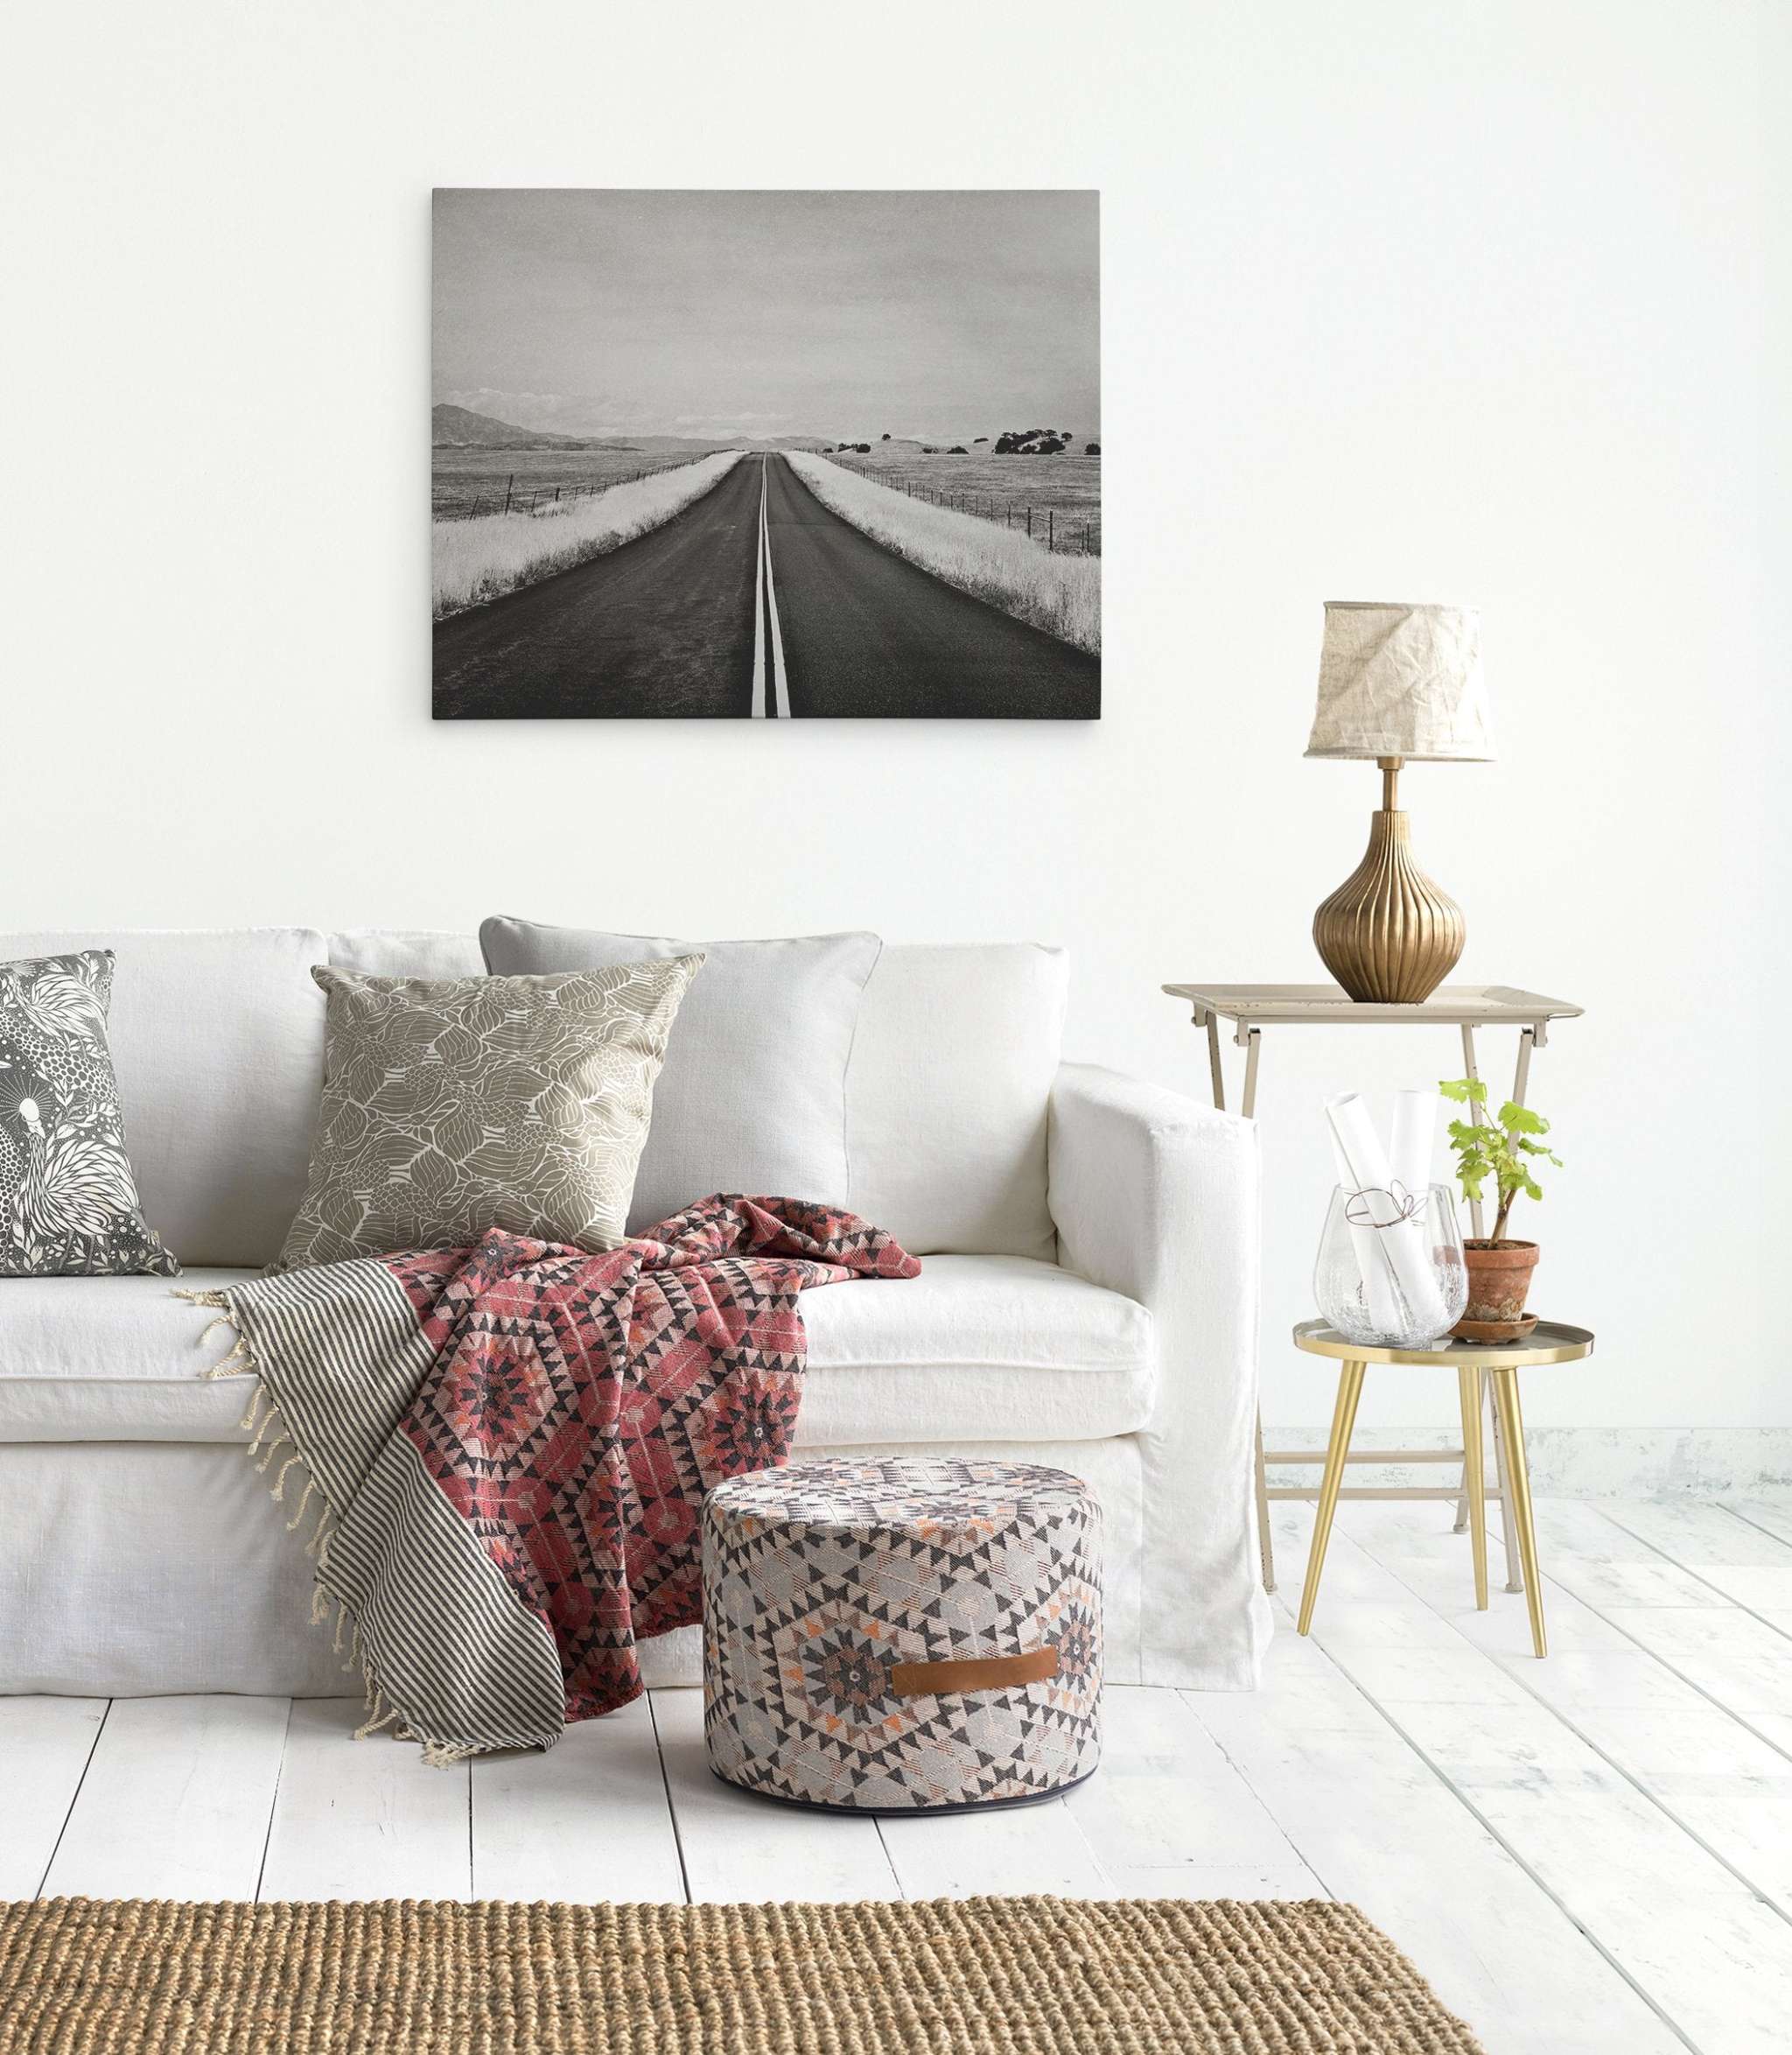 A minimalist living room features a white sofa adorned with patterned cushions and a red geometric throw. In front, a matching pouf sits on the floor. A side table with a lamp, plant, and glass vase stands nearby. Offley Green's Black and White Rural Landscape Canvas Art, 'American Road Trip,' hangs on the wall.